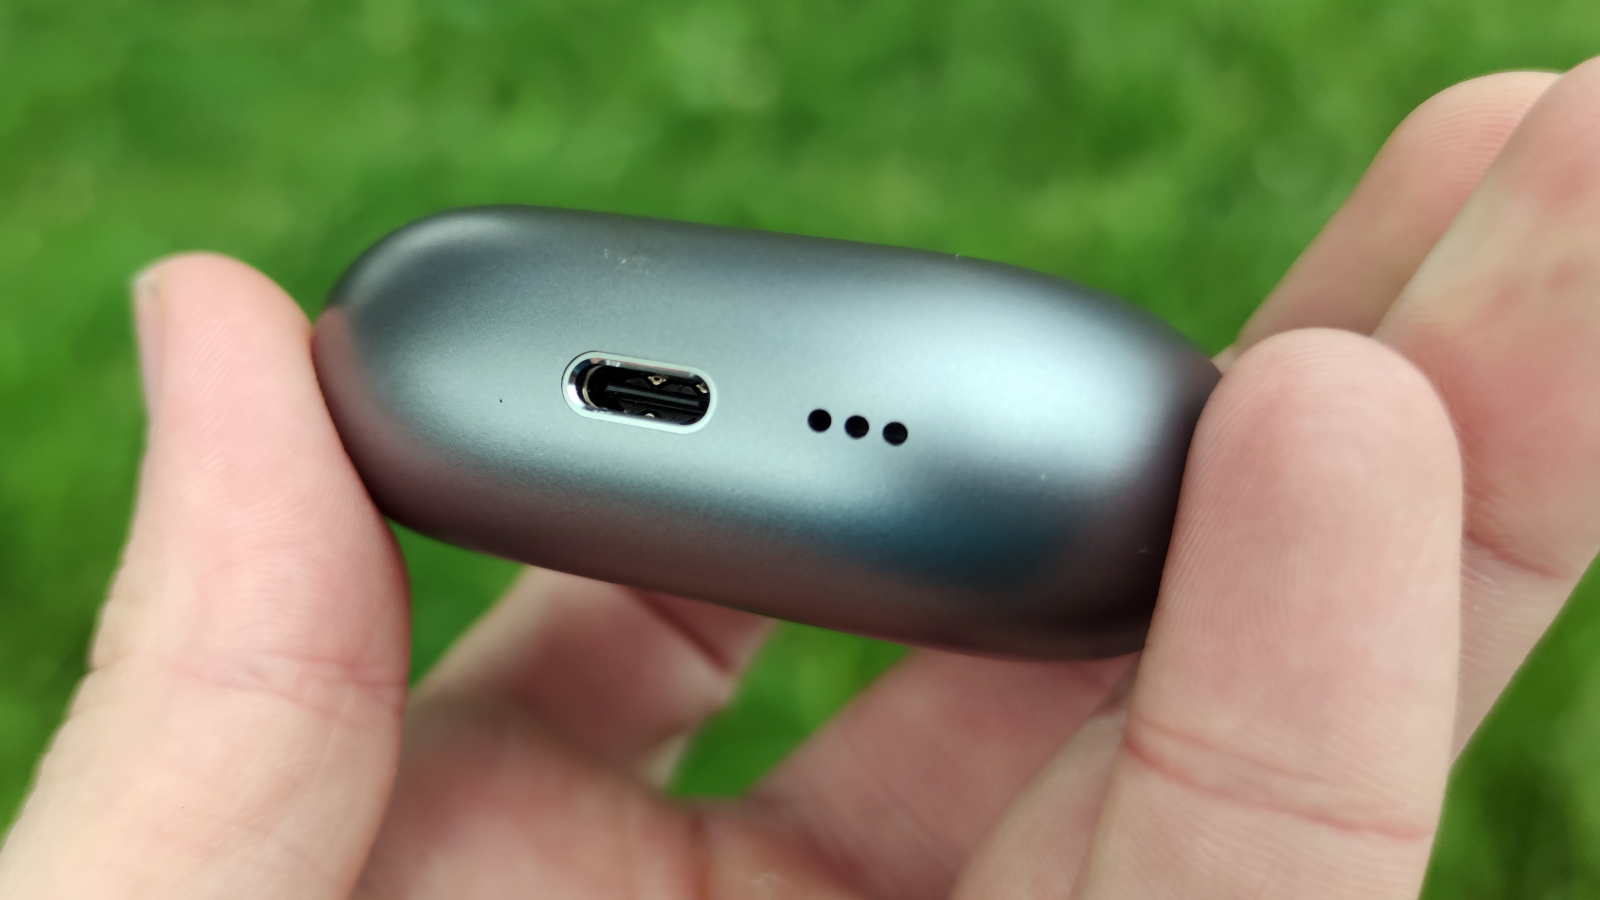 The Huawei FreeBuds Pro 3 being held in a hand above a grassy field.